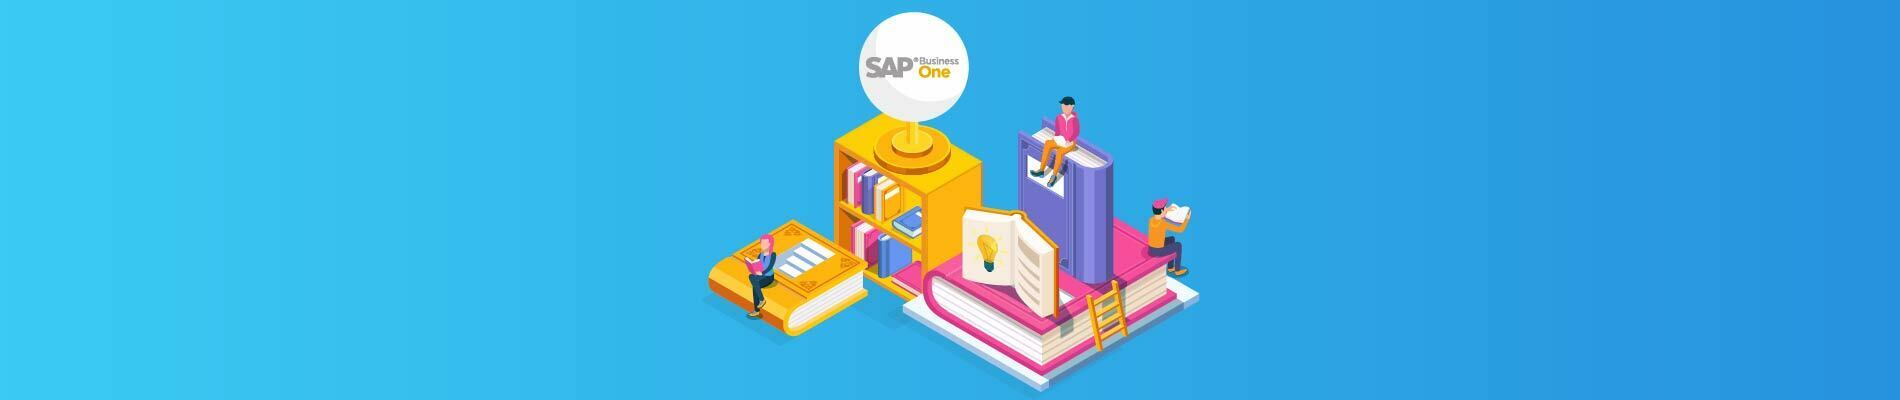 How to Generate an Access Token in SAP B1? – SAP B1 User Guide